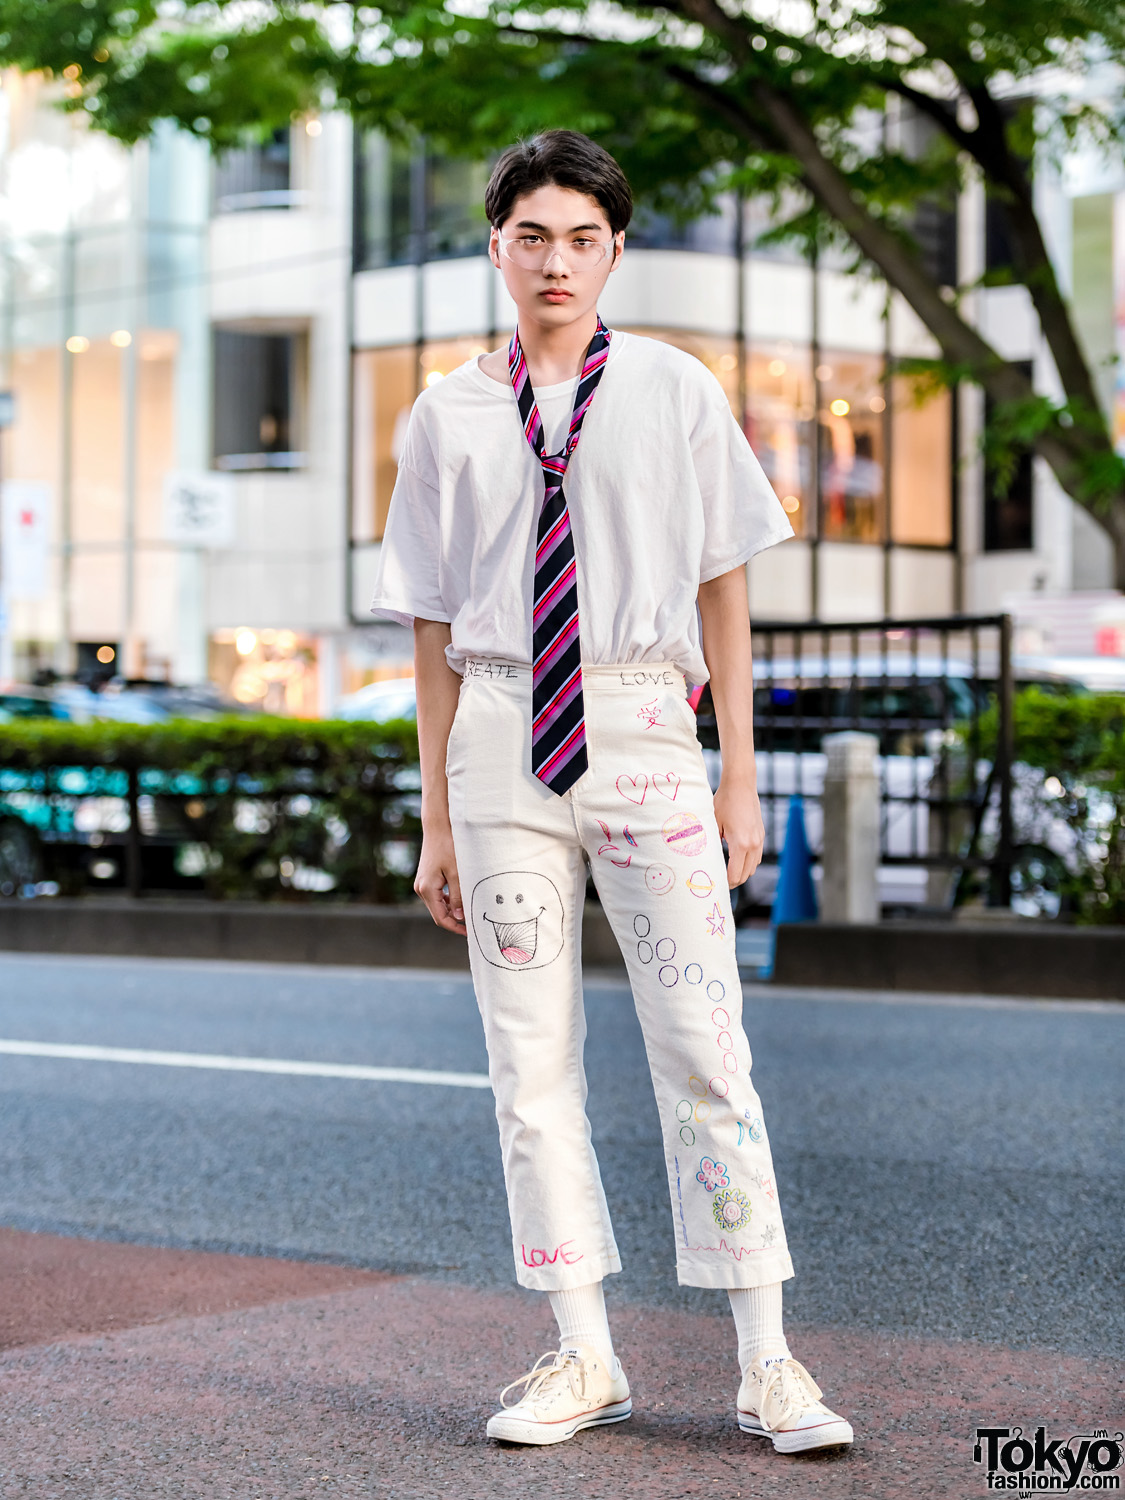 Japanese Model in All White Streetwear w/ Remake Writing Cropped Pants, Converse Sneakers & Paul Smith Necktie